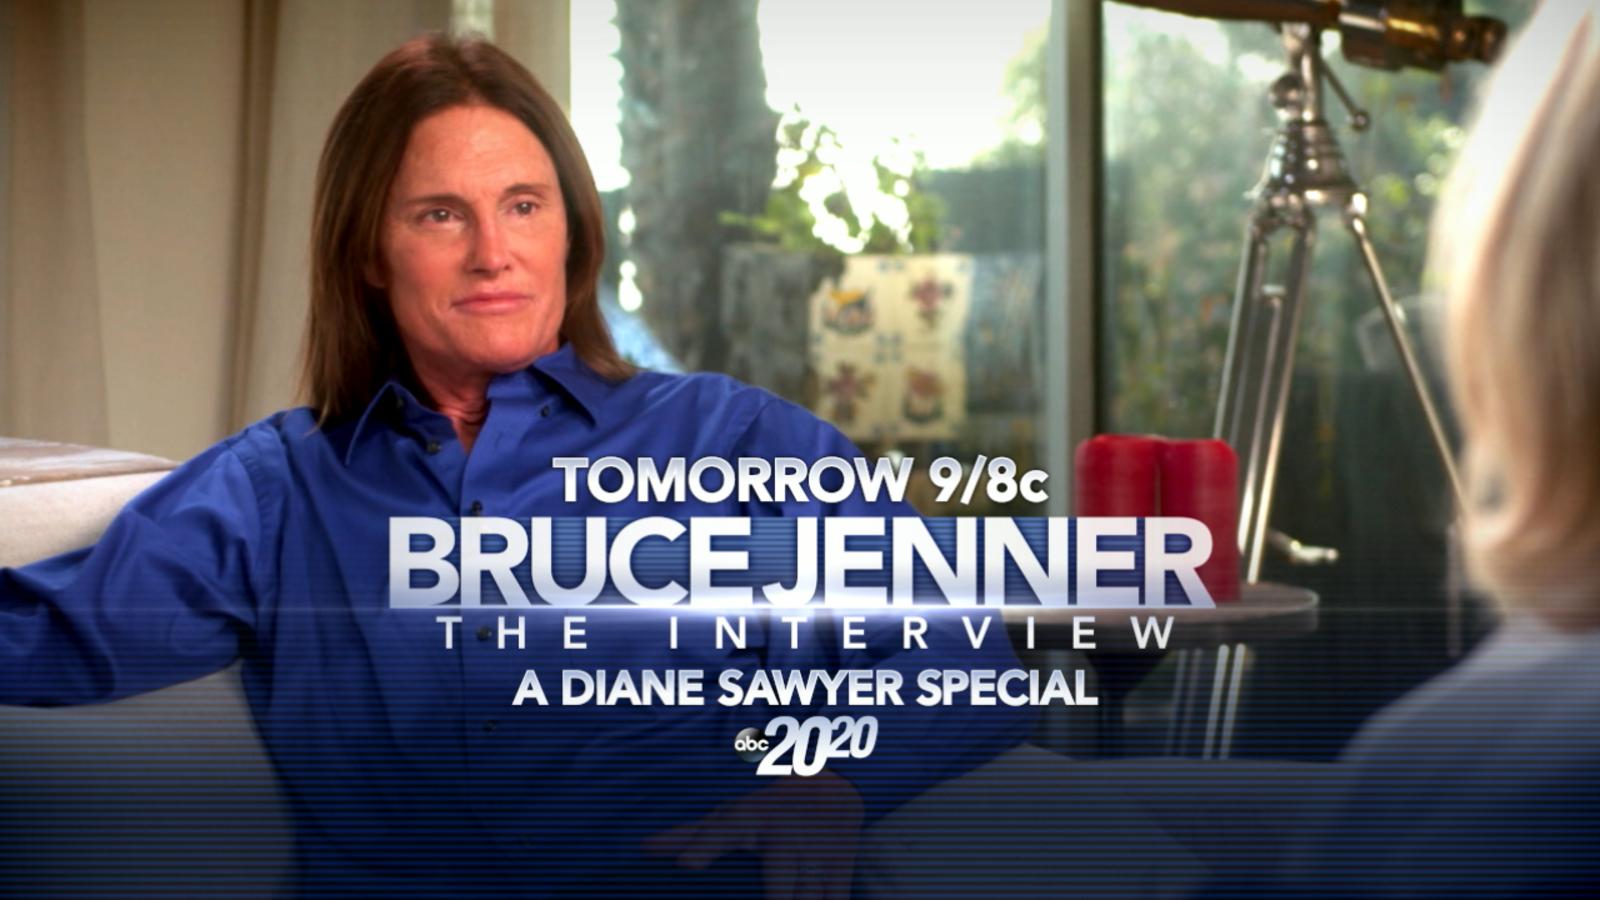  of hair loss 2020 bruce jenner the interview watch and balding by 2020